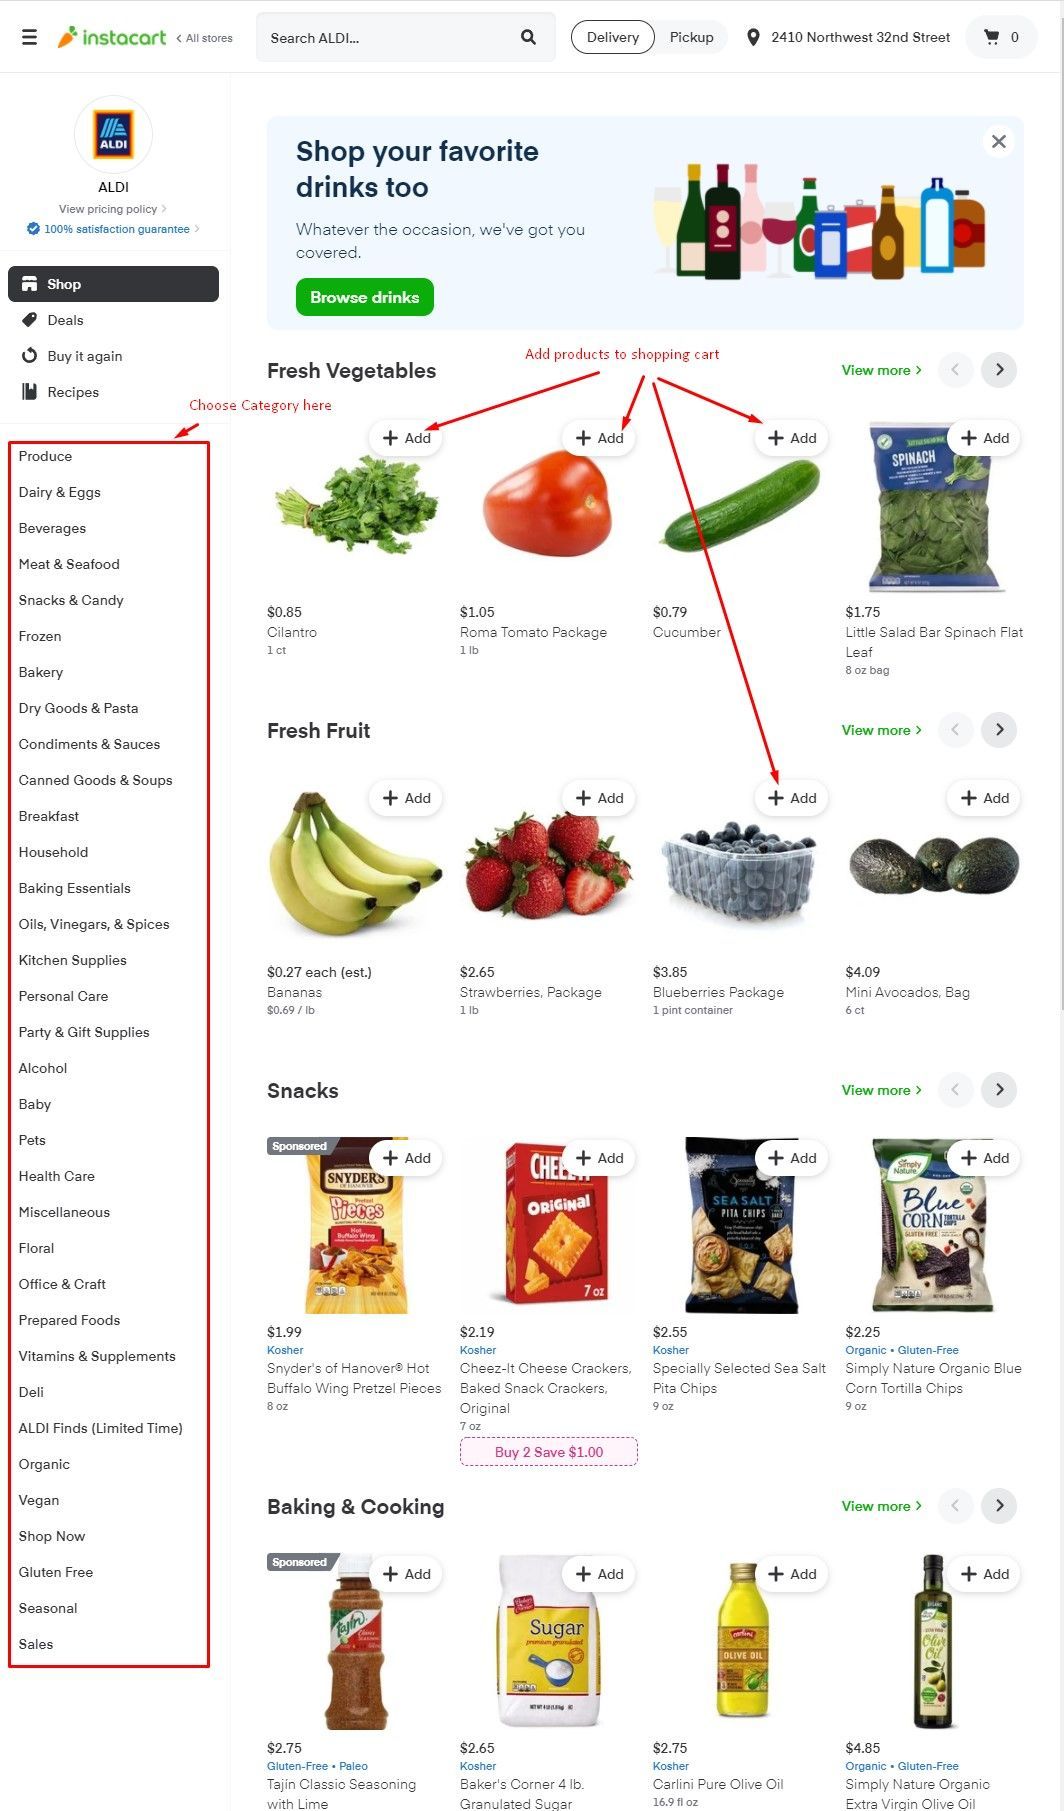 aldi order online product selection